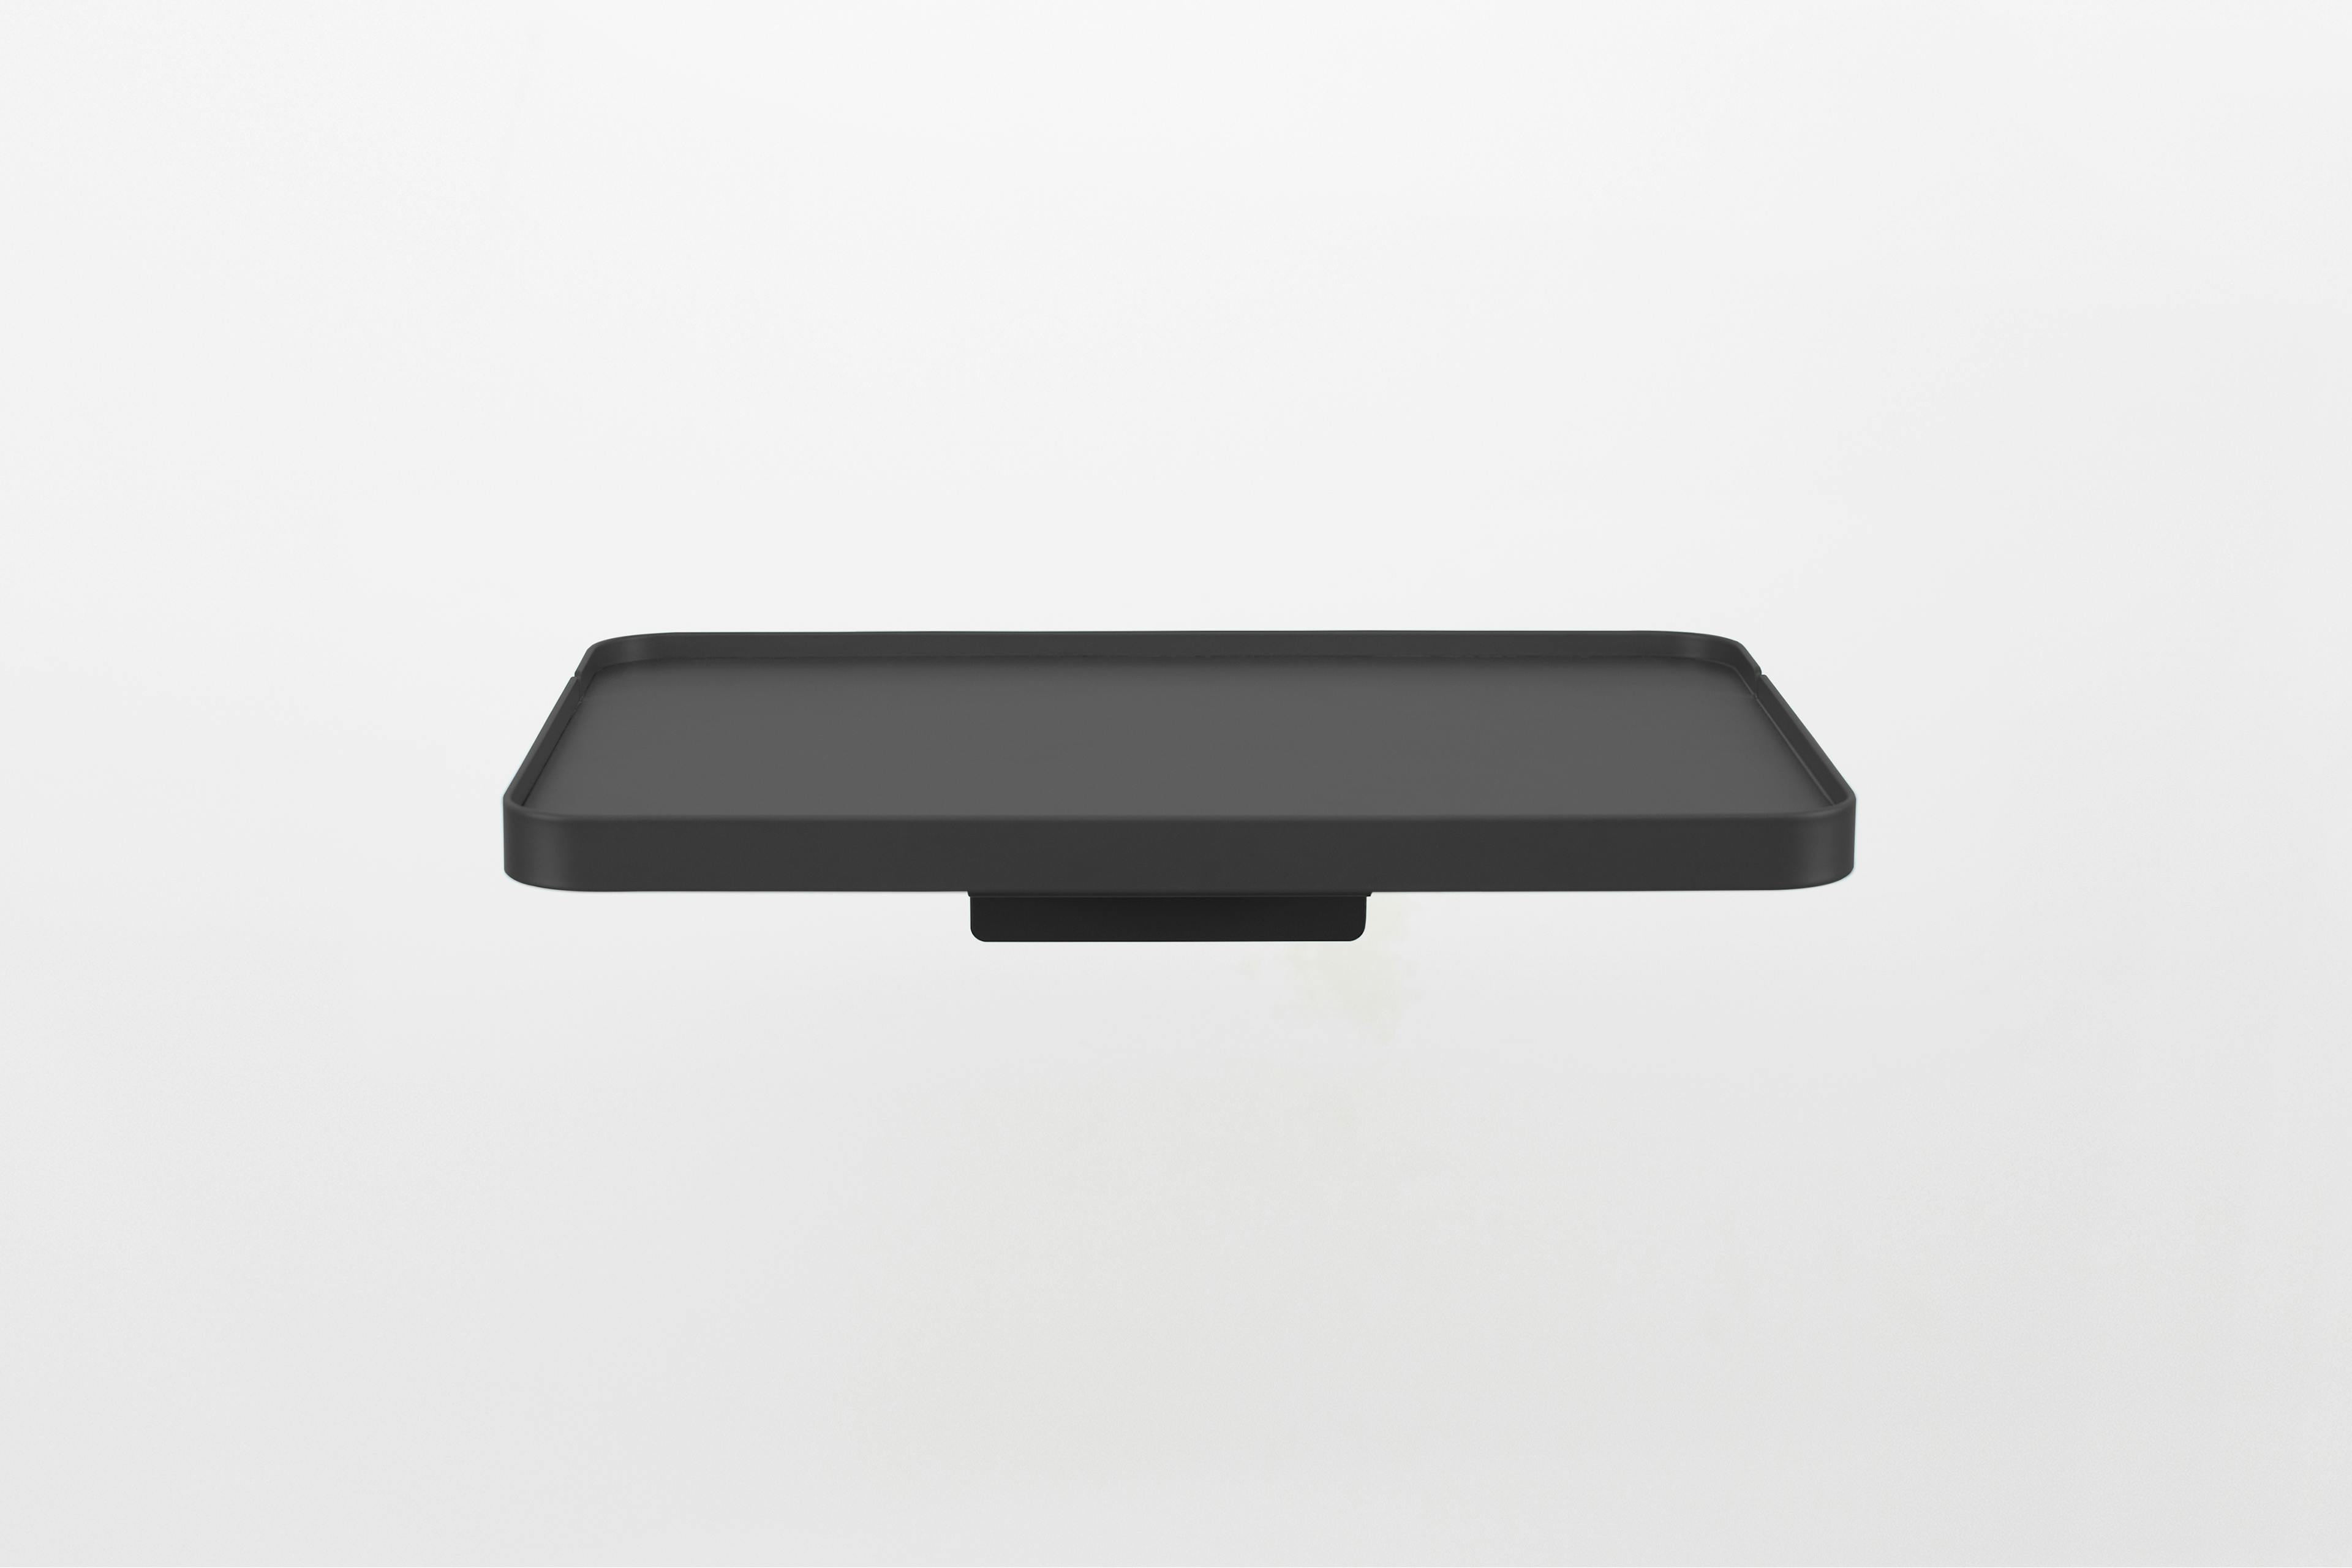 The Tray in Matte Black, Displayed from Front View